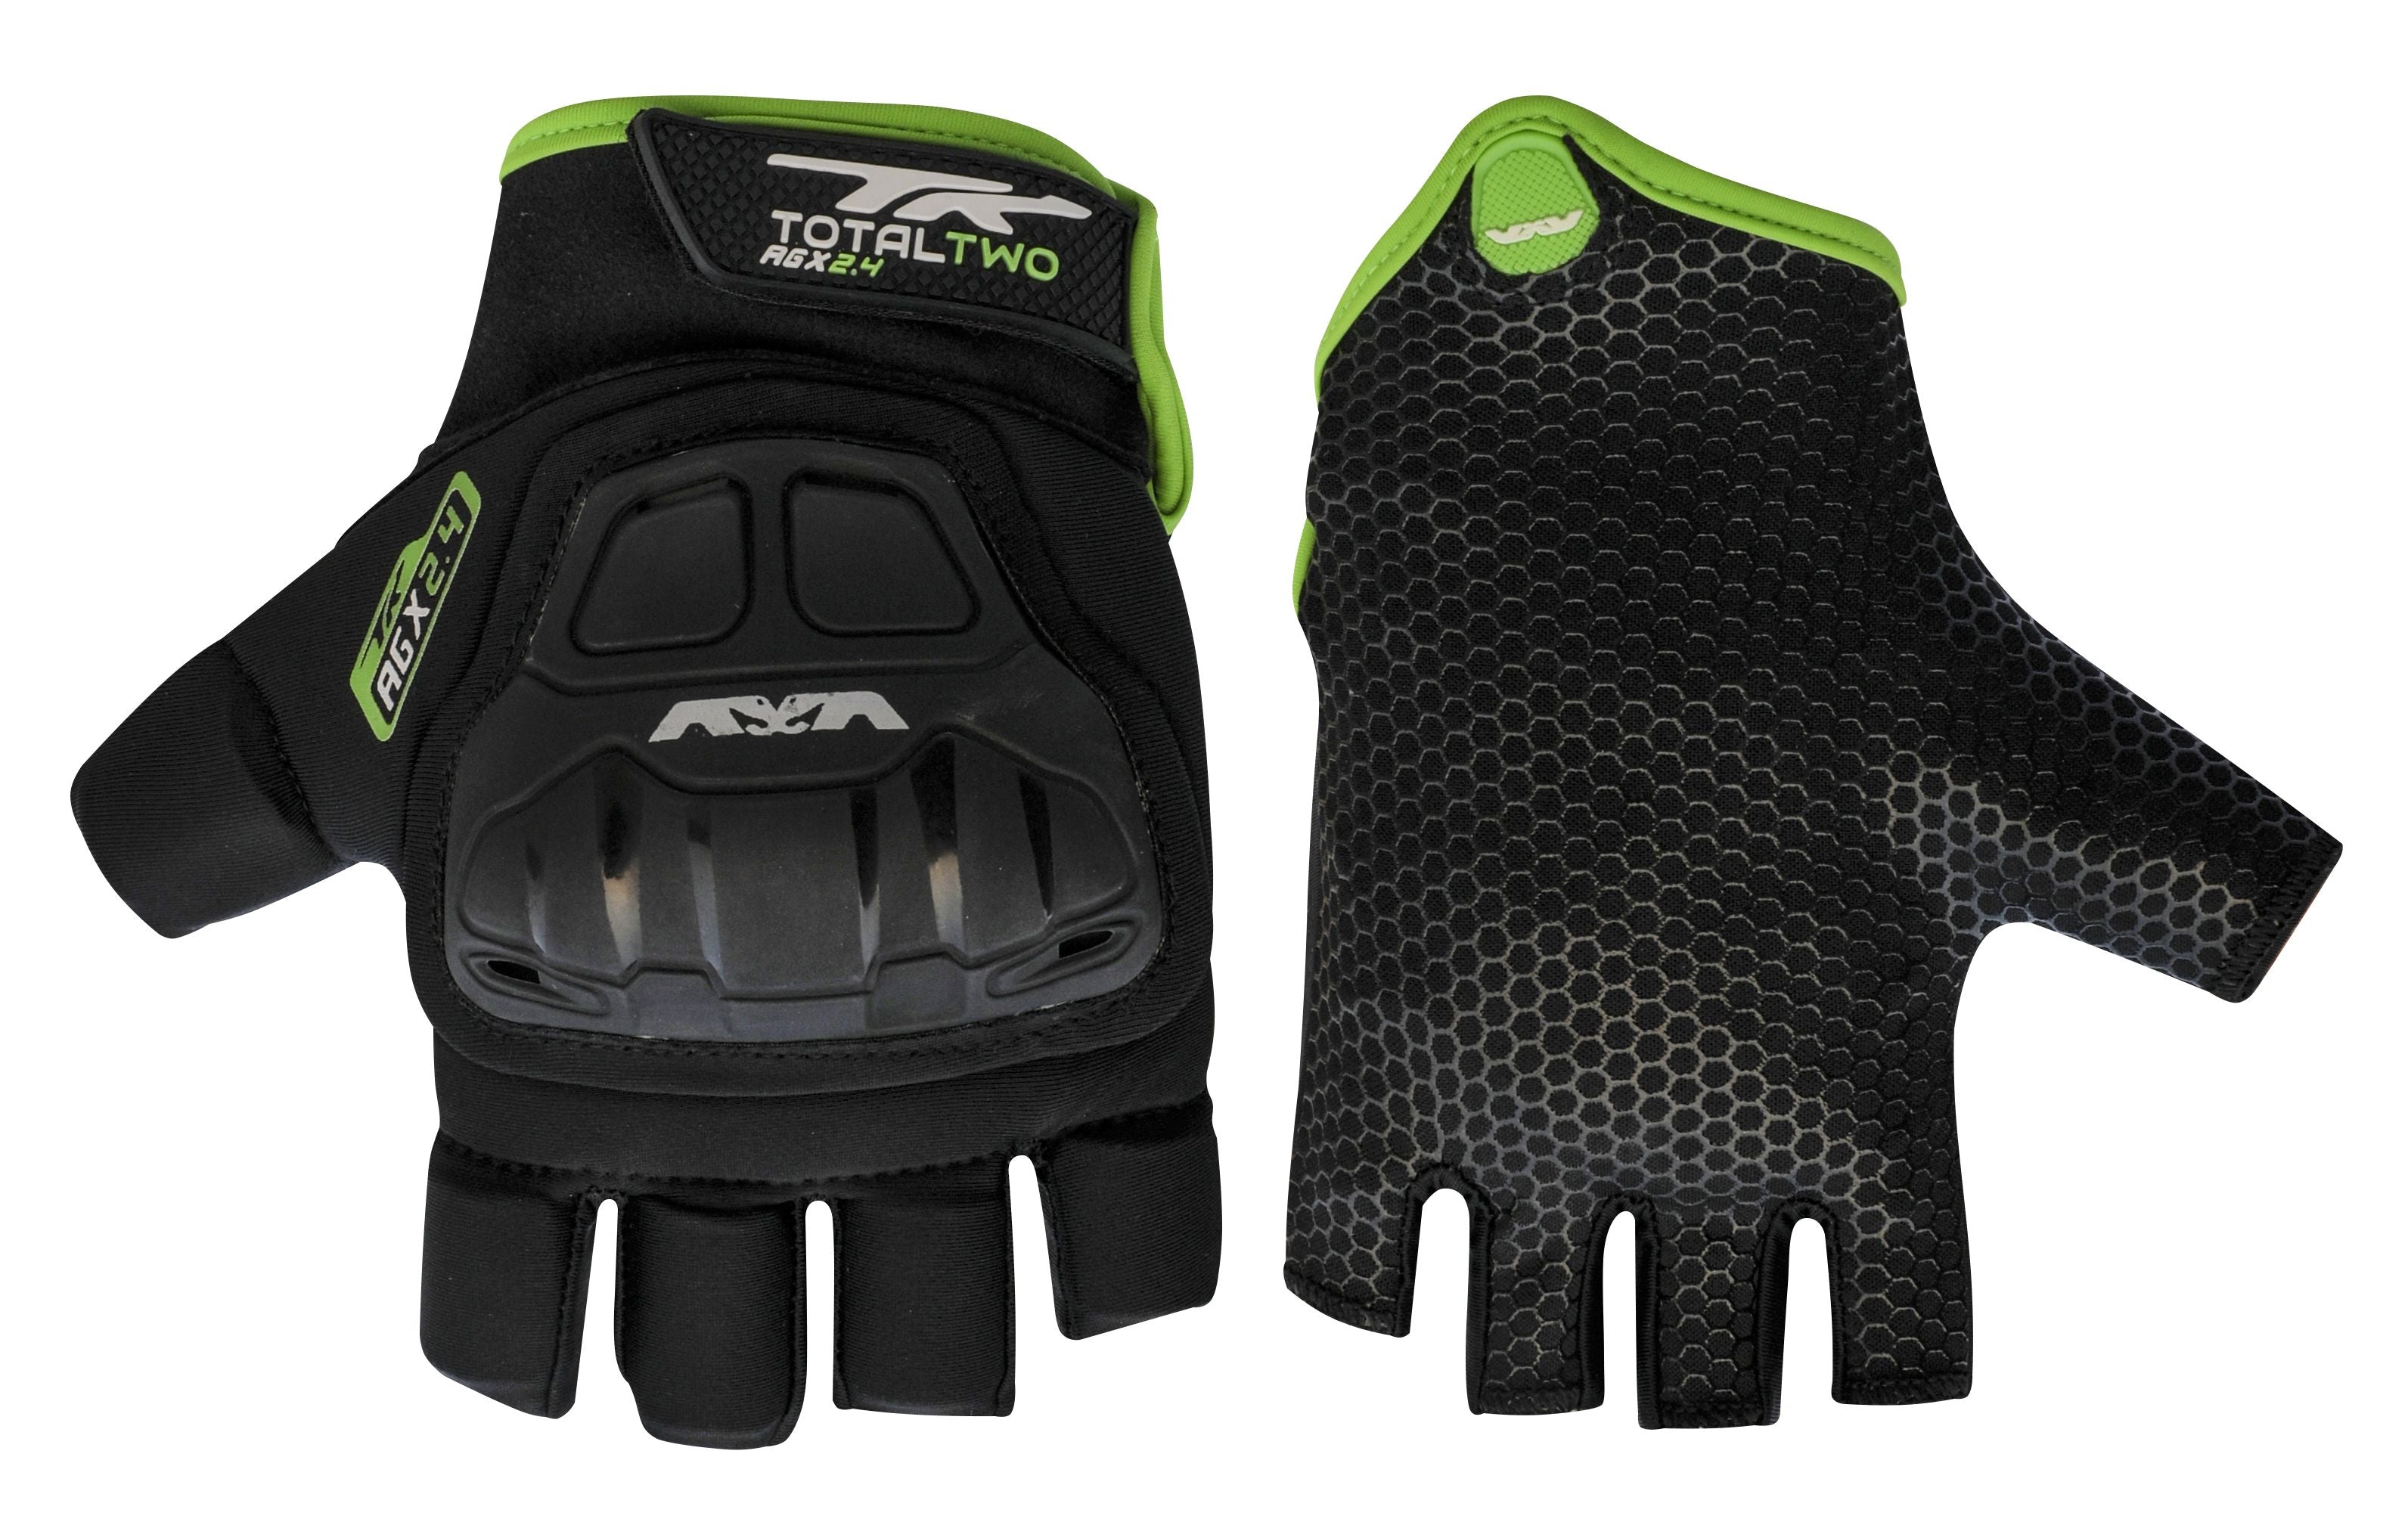 TK TOTAL TWO AGX 2.4 GLOVE WITH PALM